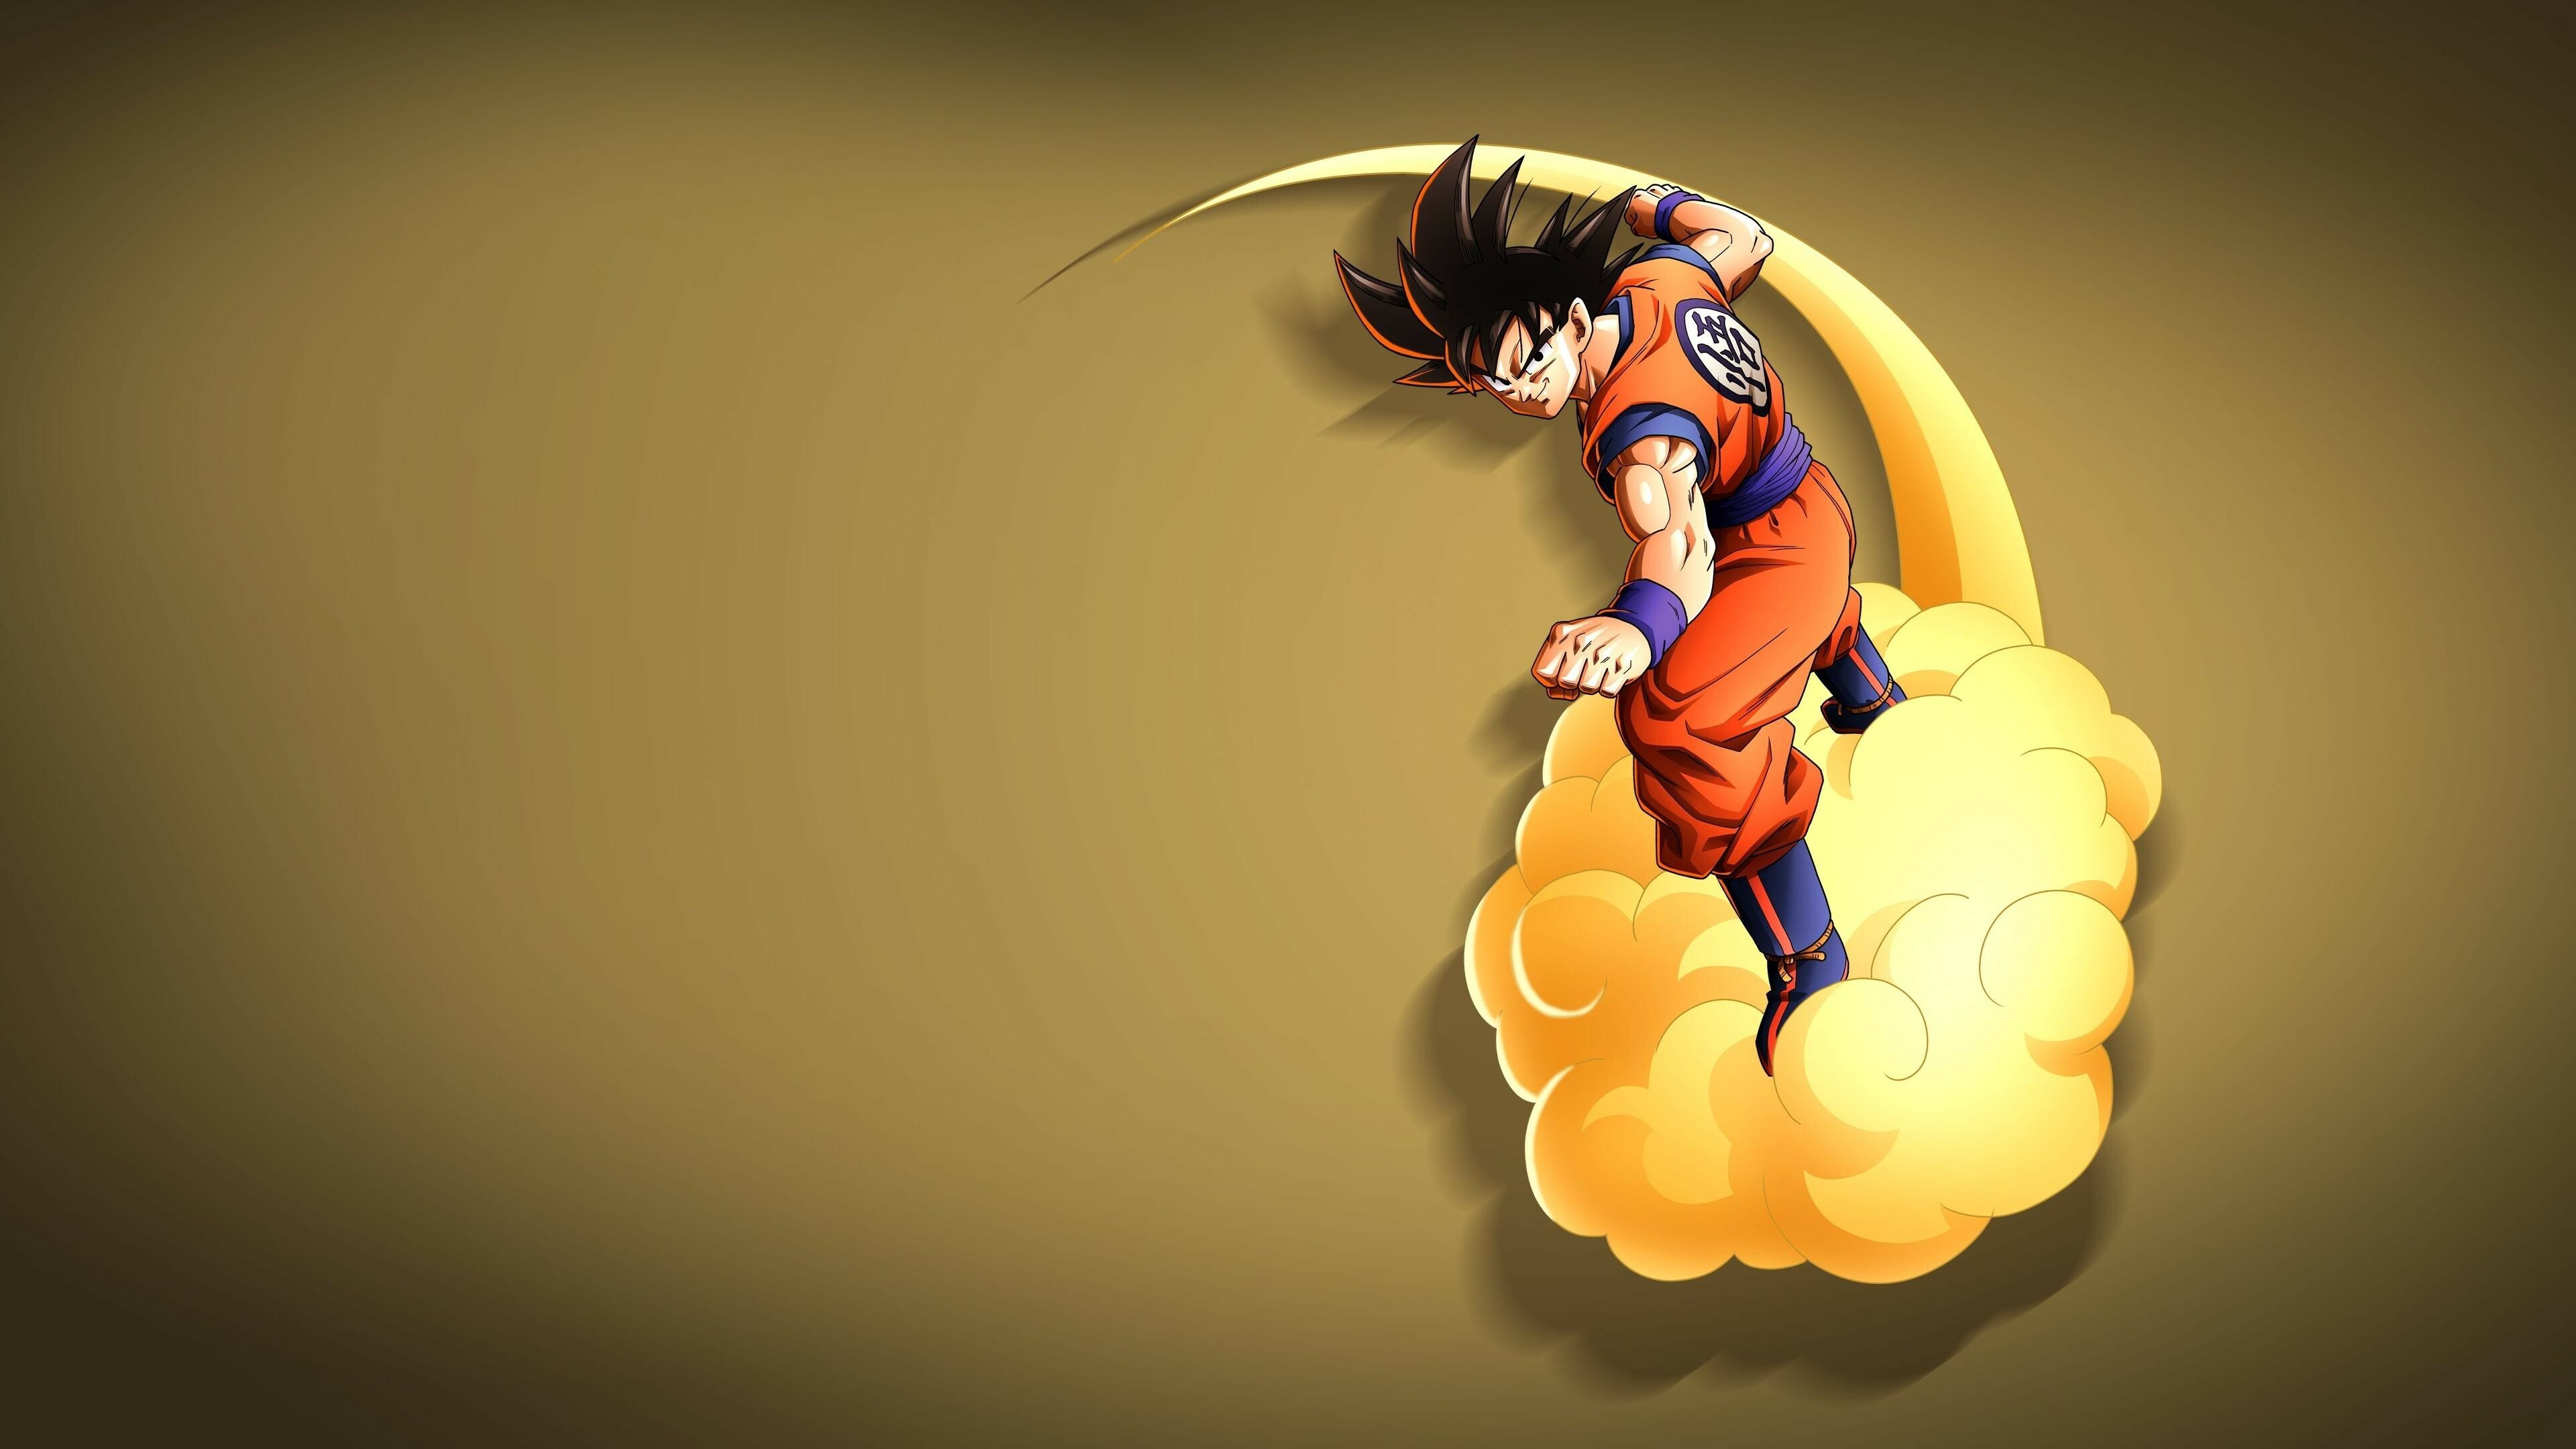 Dragon Ball Z: Anime series, Aired in Japan on Fuji TV from April 1989 to January 1996. 3840x2160 4K Wallpaper.